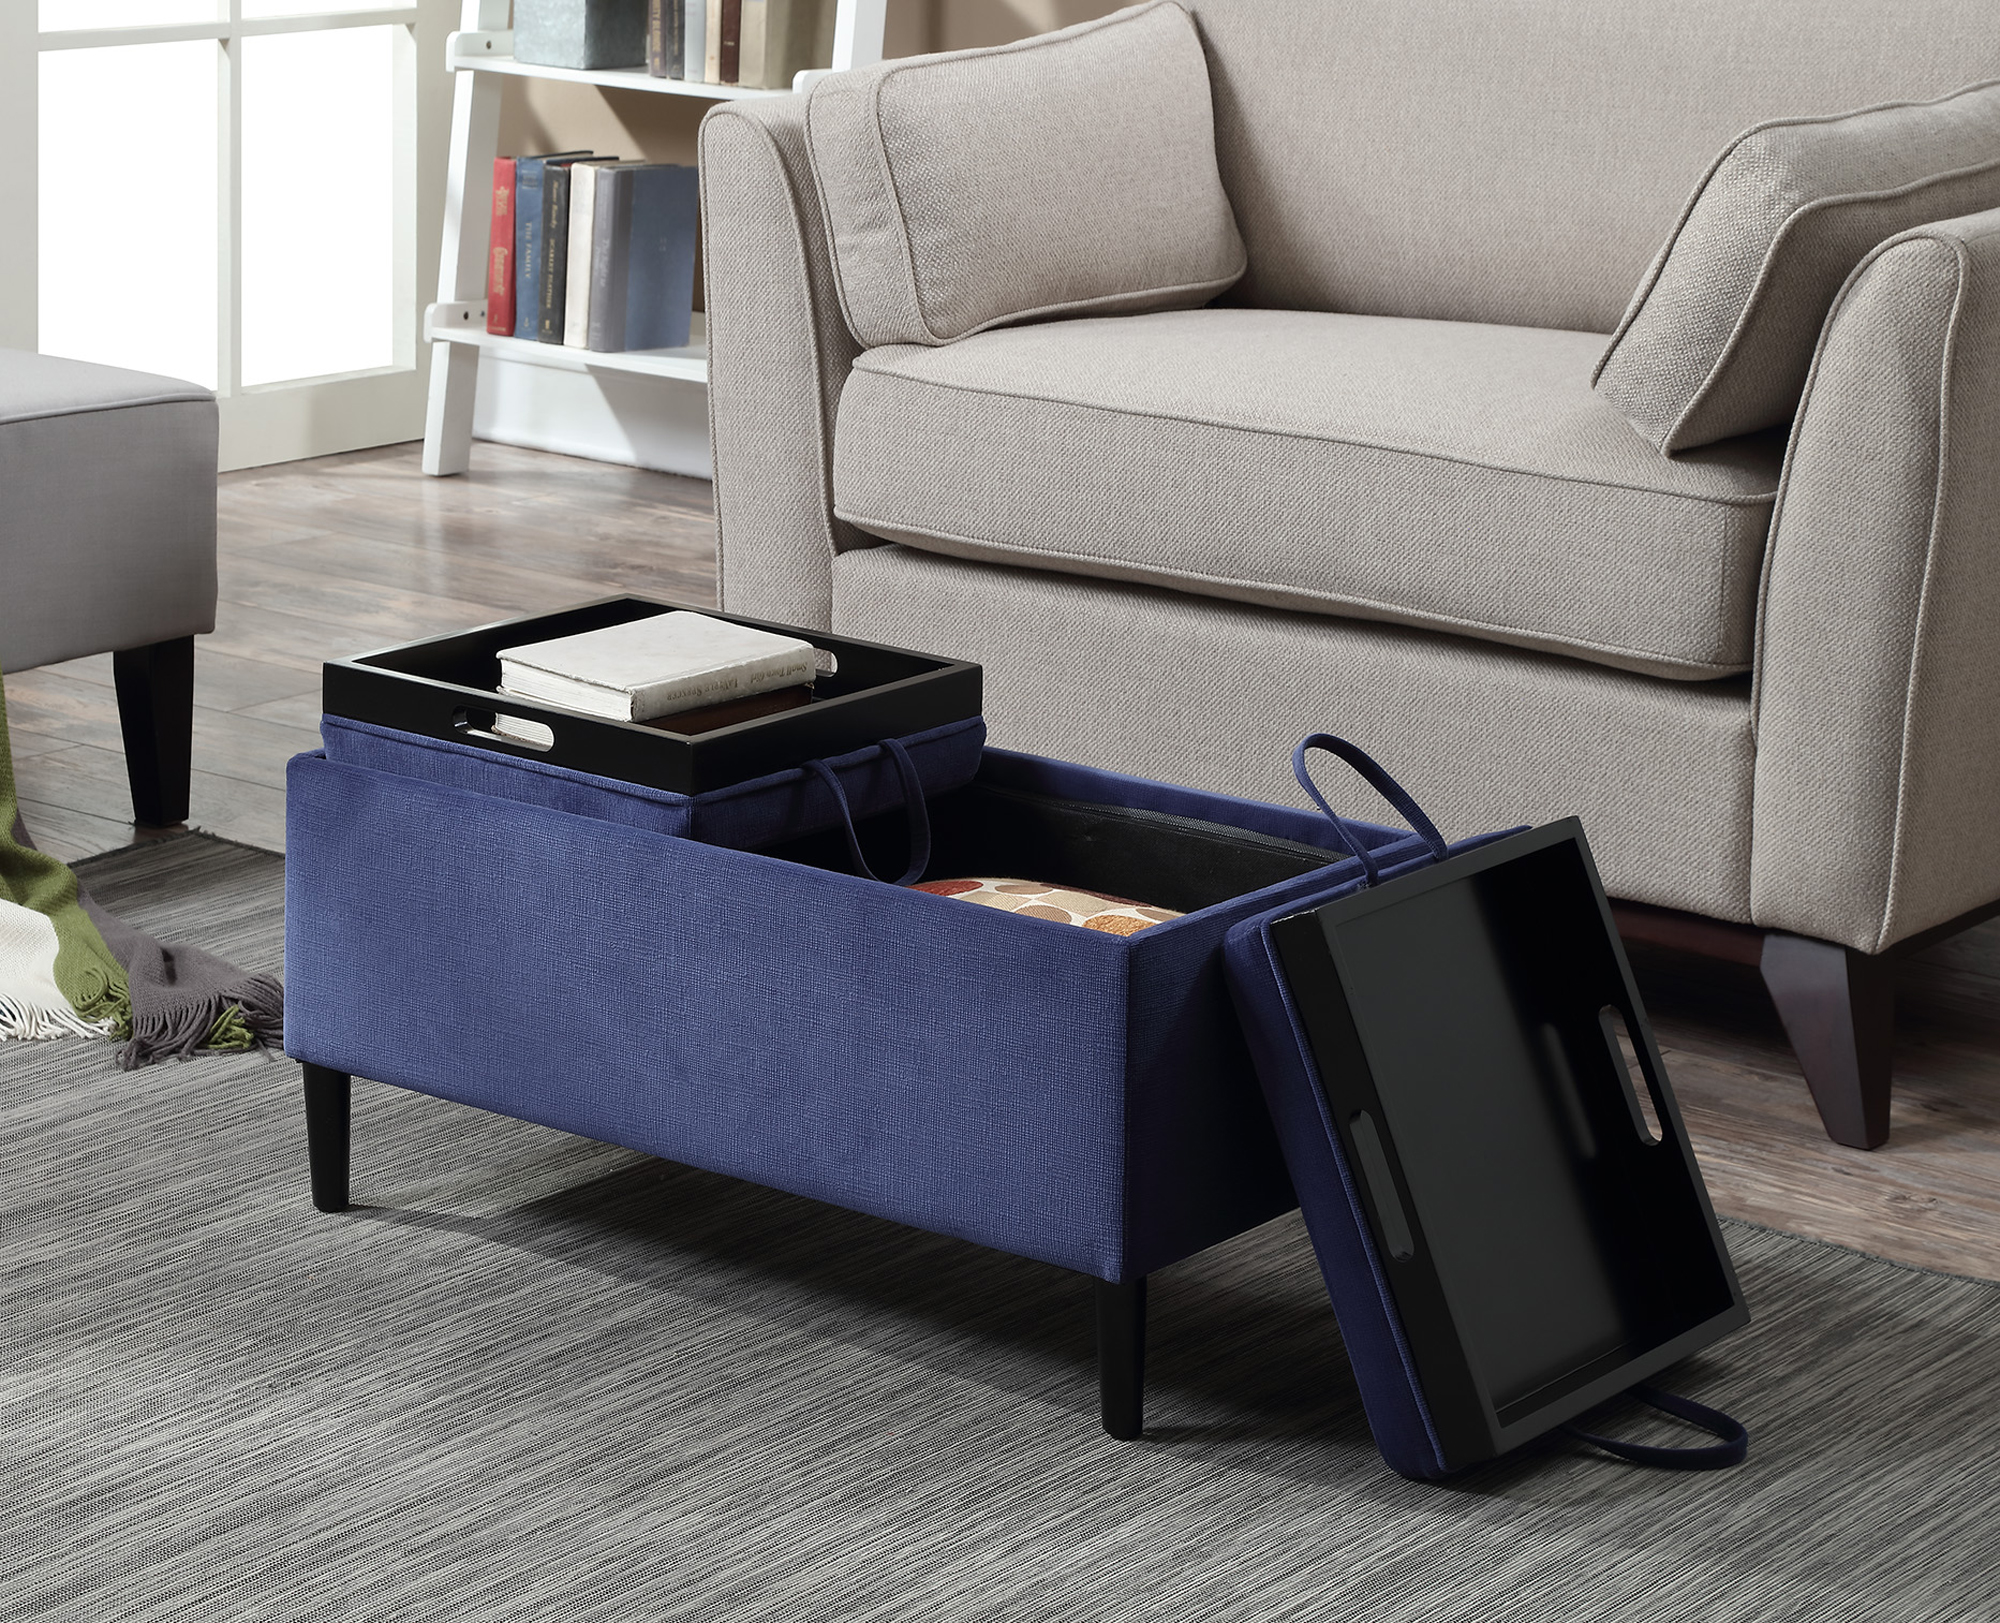 Convenience Concepts Designs4Comfort Magnolia Storage Ottoman with Reversible Trays, Dark Blue Corduroy - image 1 of 4